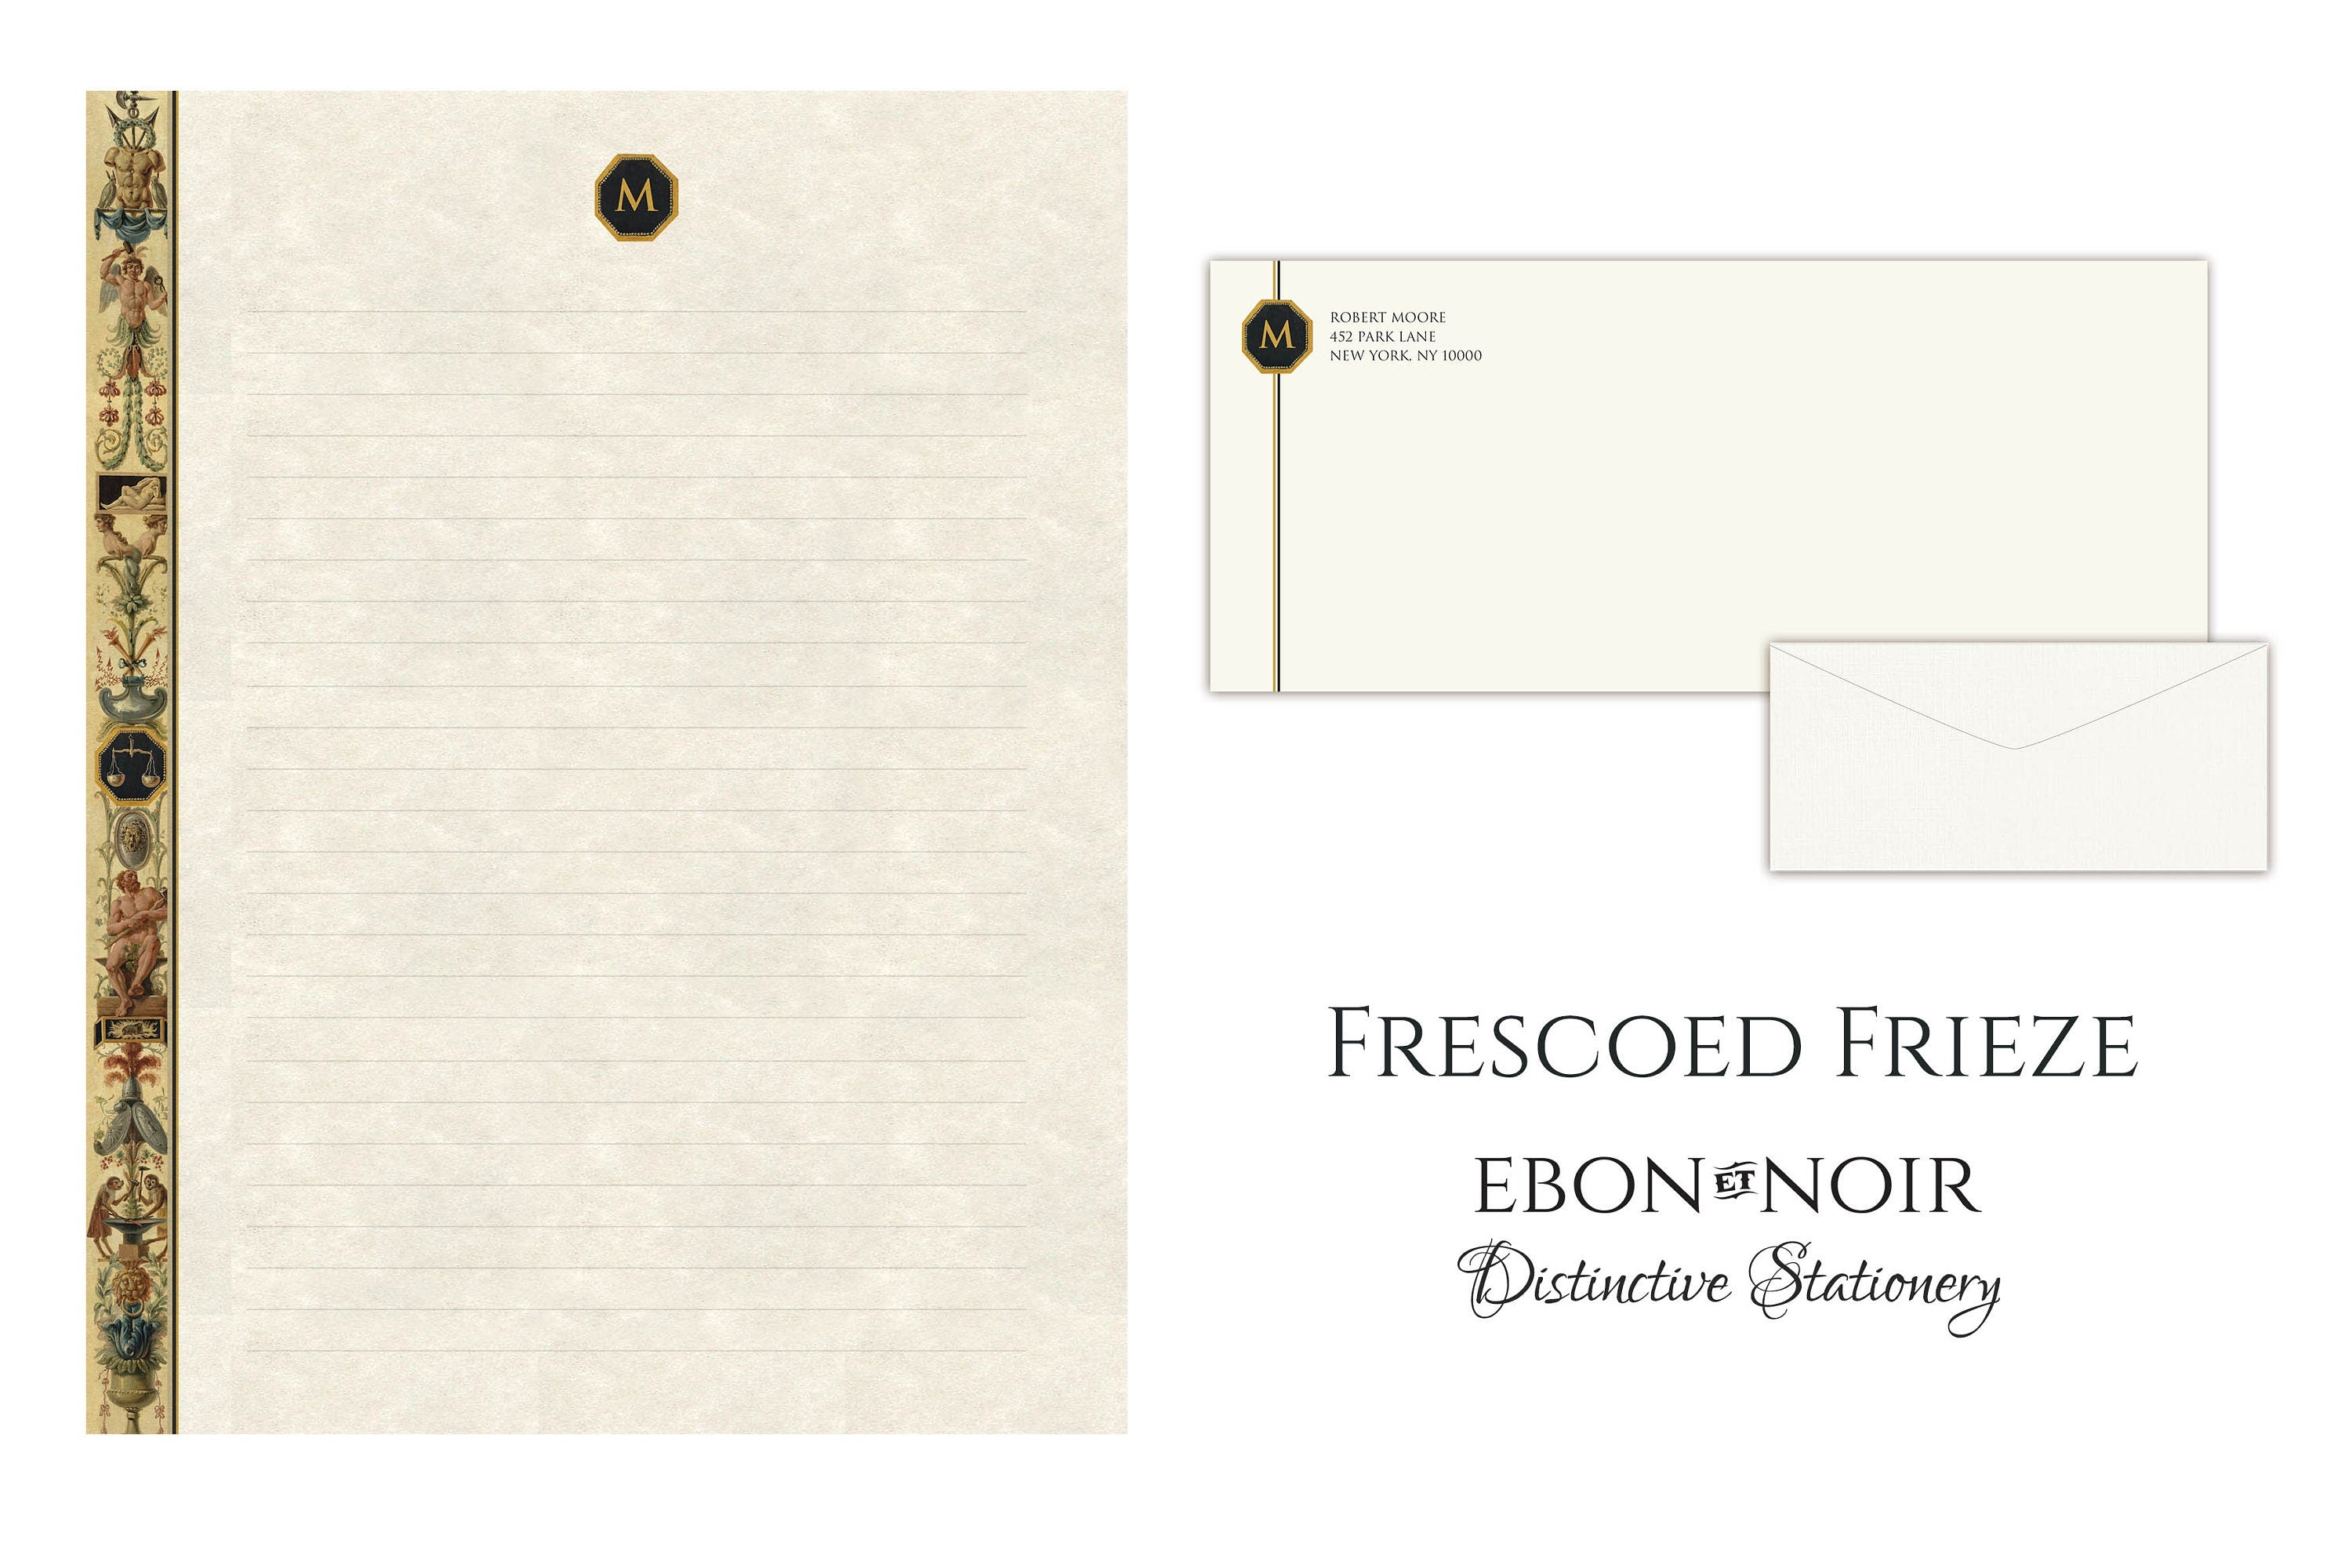 Frescoed Frieze, Luxurious Handcrafted Stationery Set for Letter Writing, Personalized, 12 Sheets/10 Envelopes